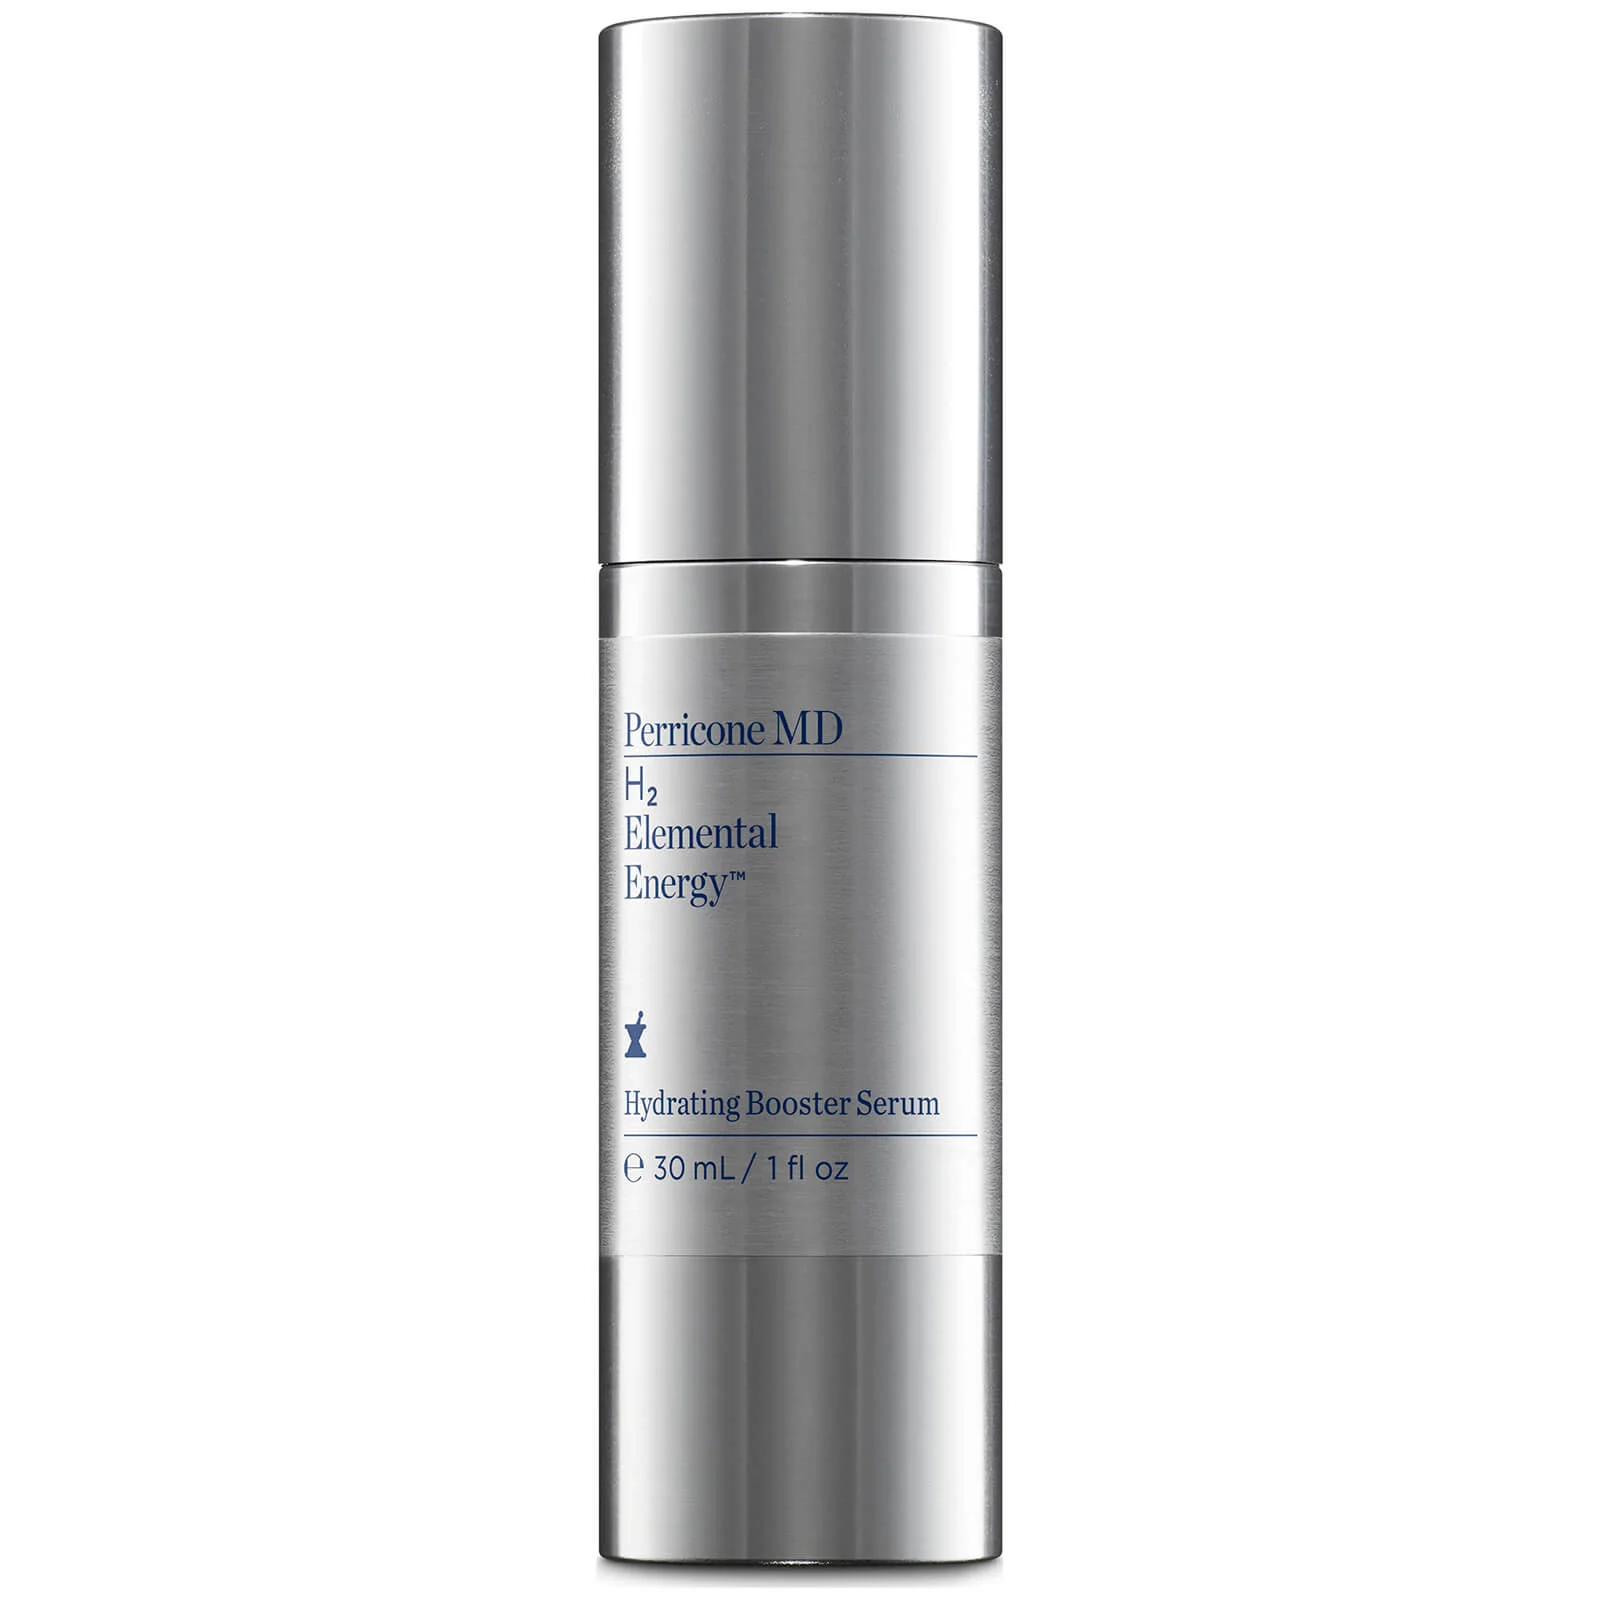 Perricone MD H2 Elemental Energy Hydrating Booster Serum 30ml Image 1